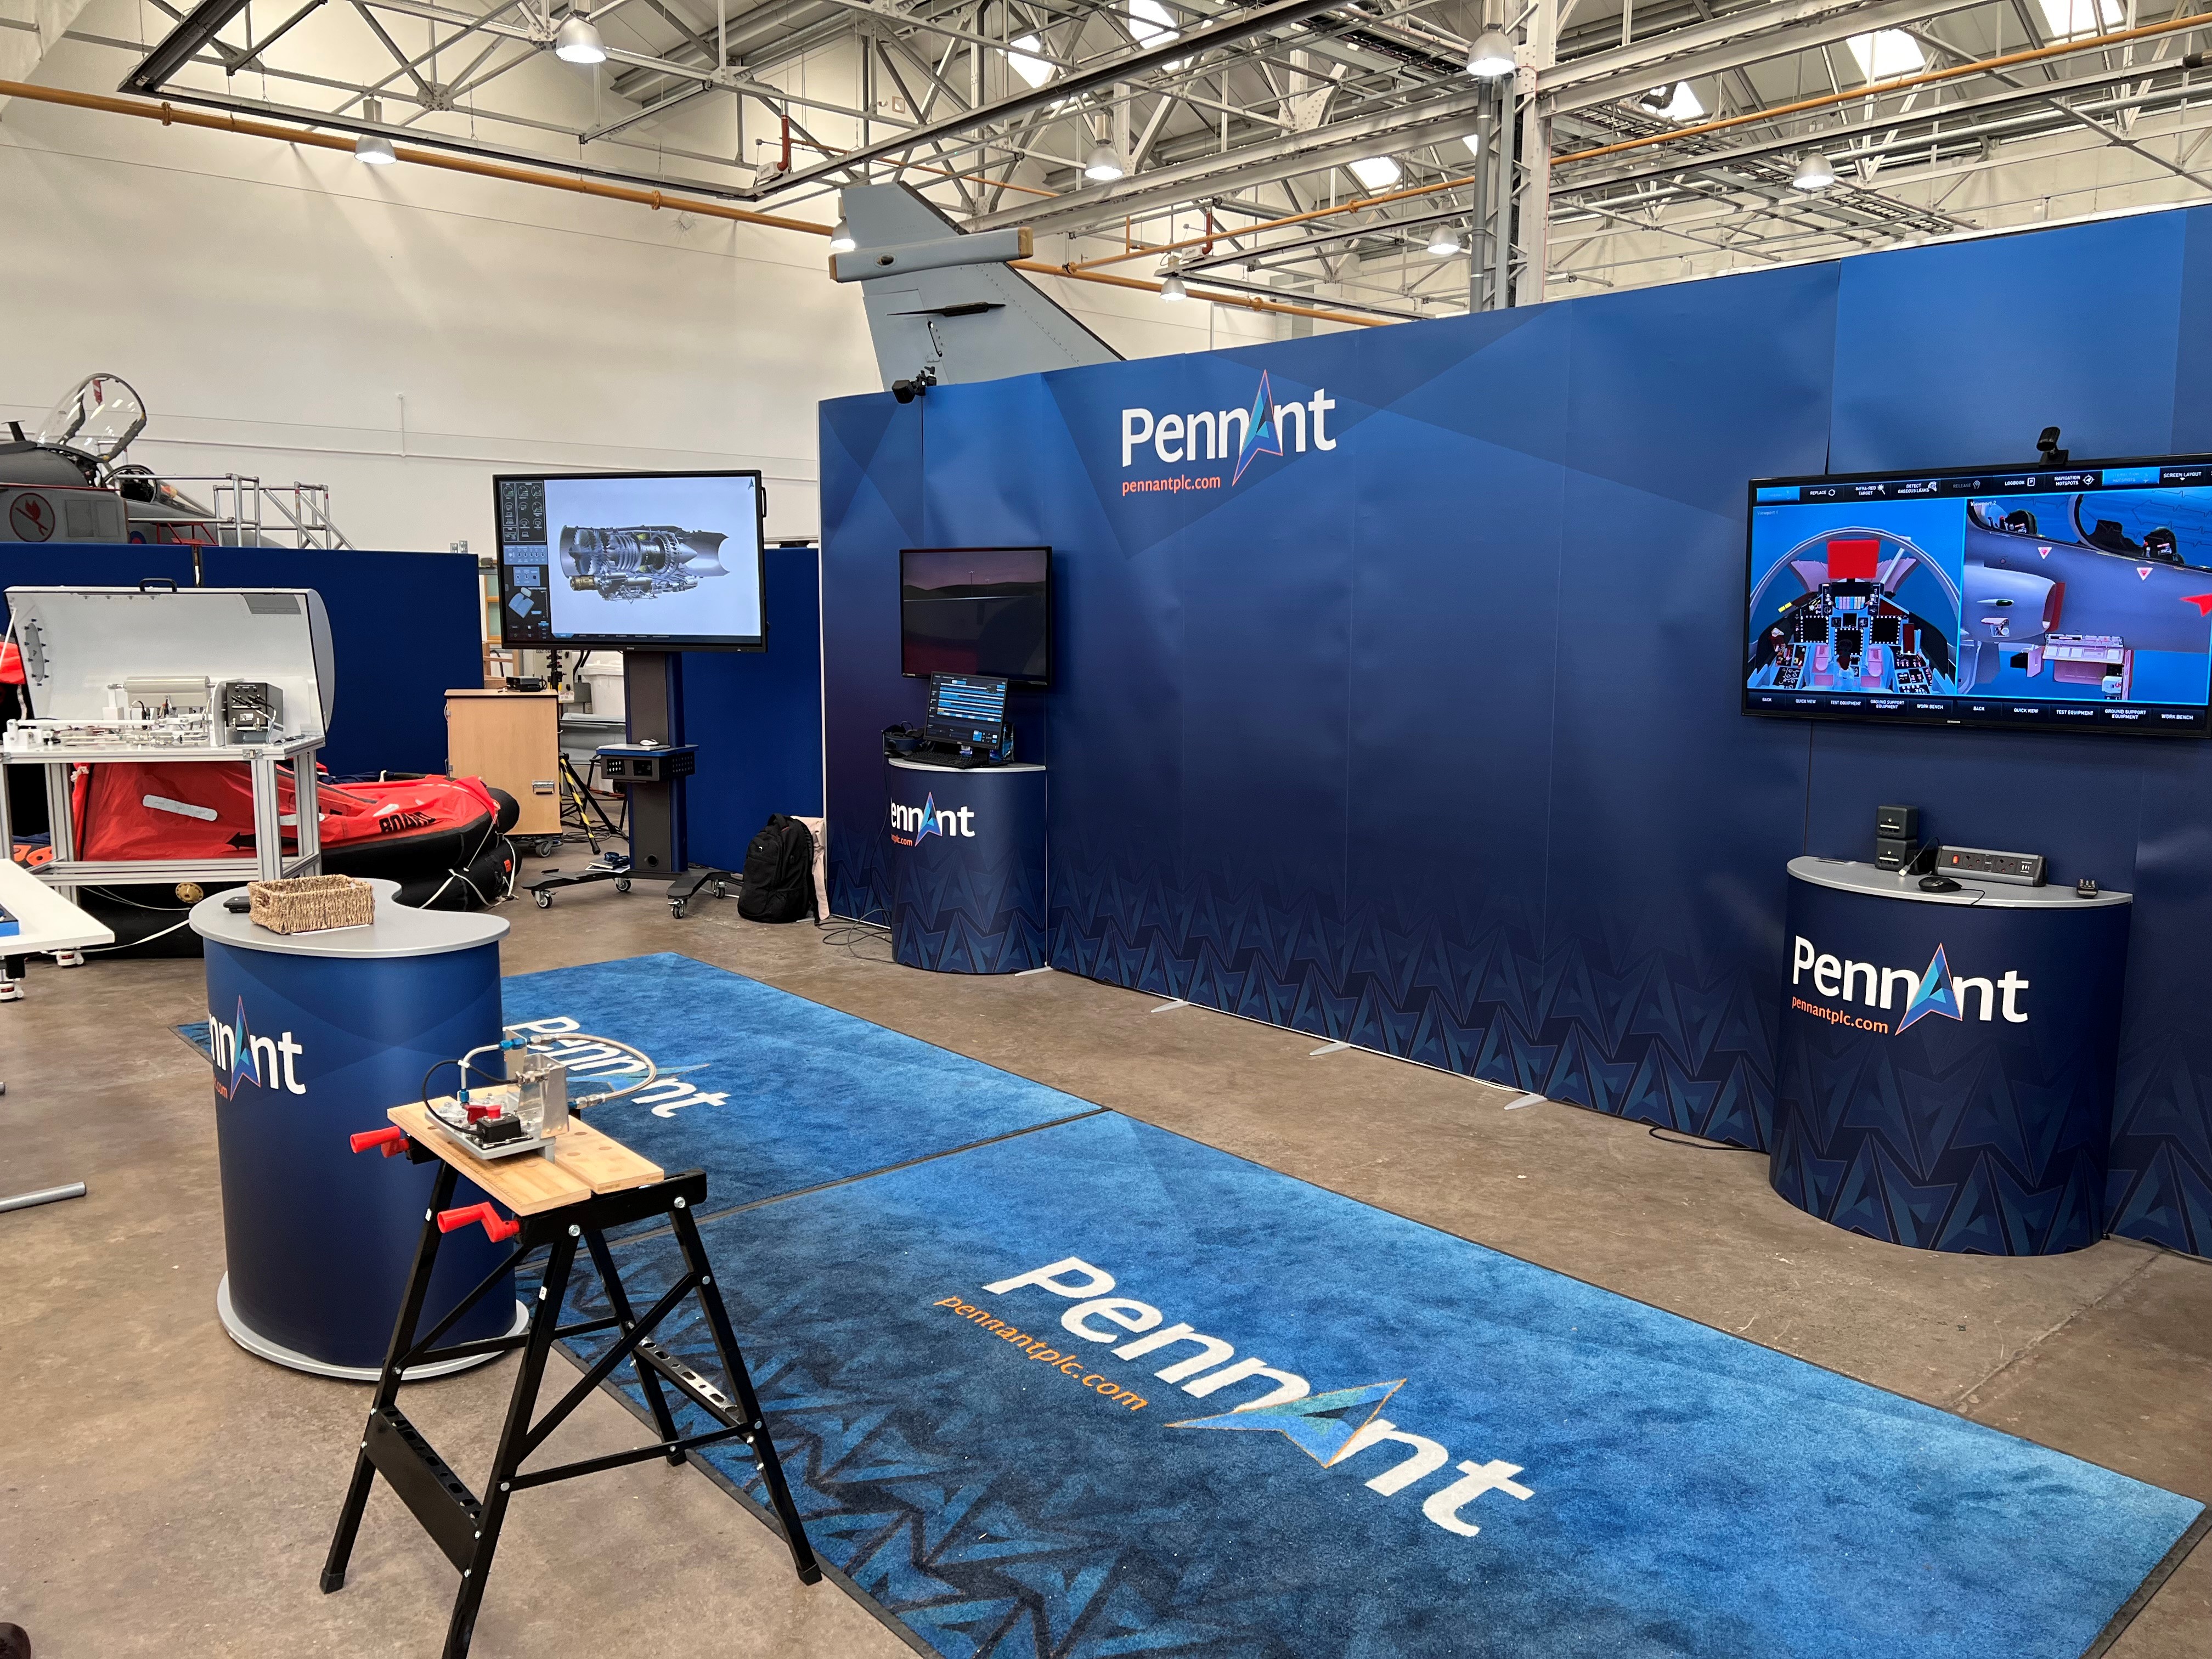 An image of what appears to be an exhibition stand. The stand backdrop is dark navy and there is a variety of equipment and products on display including screens, and hardware engineering equipment.